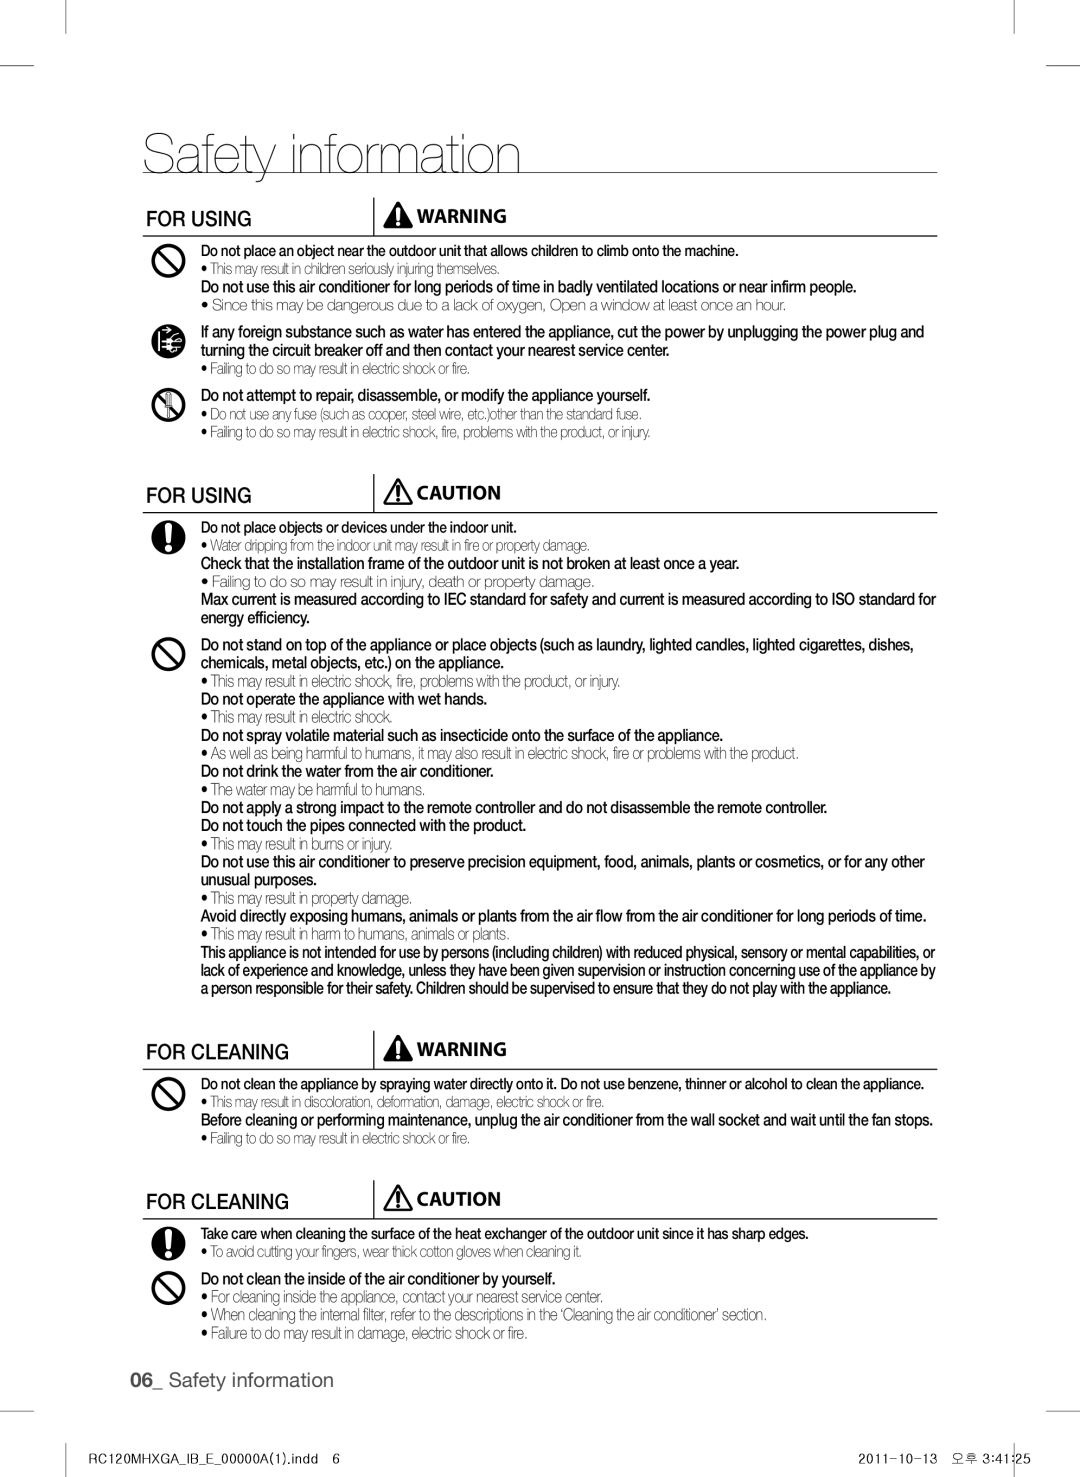 Samsung RC120MHXEA, RC160MHXGA, RC160MHXEA, RC120MHXGA, RC140MHXEA, RC140MHXGA Safety information, For Cleaning, For Using 